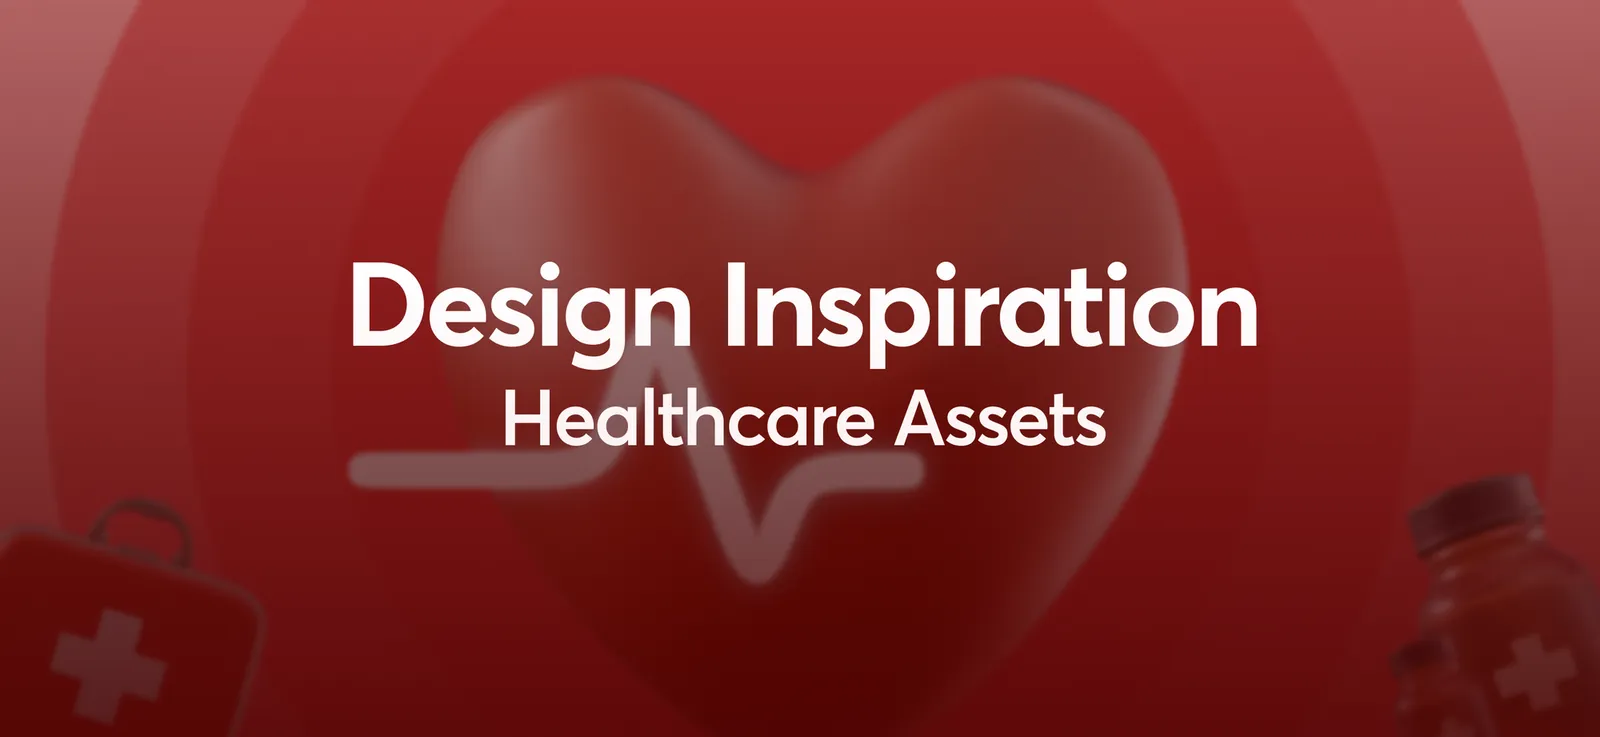 Weekly Design Inspiration - Health Care